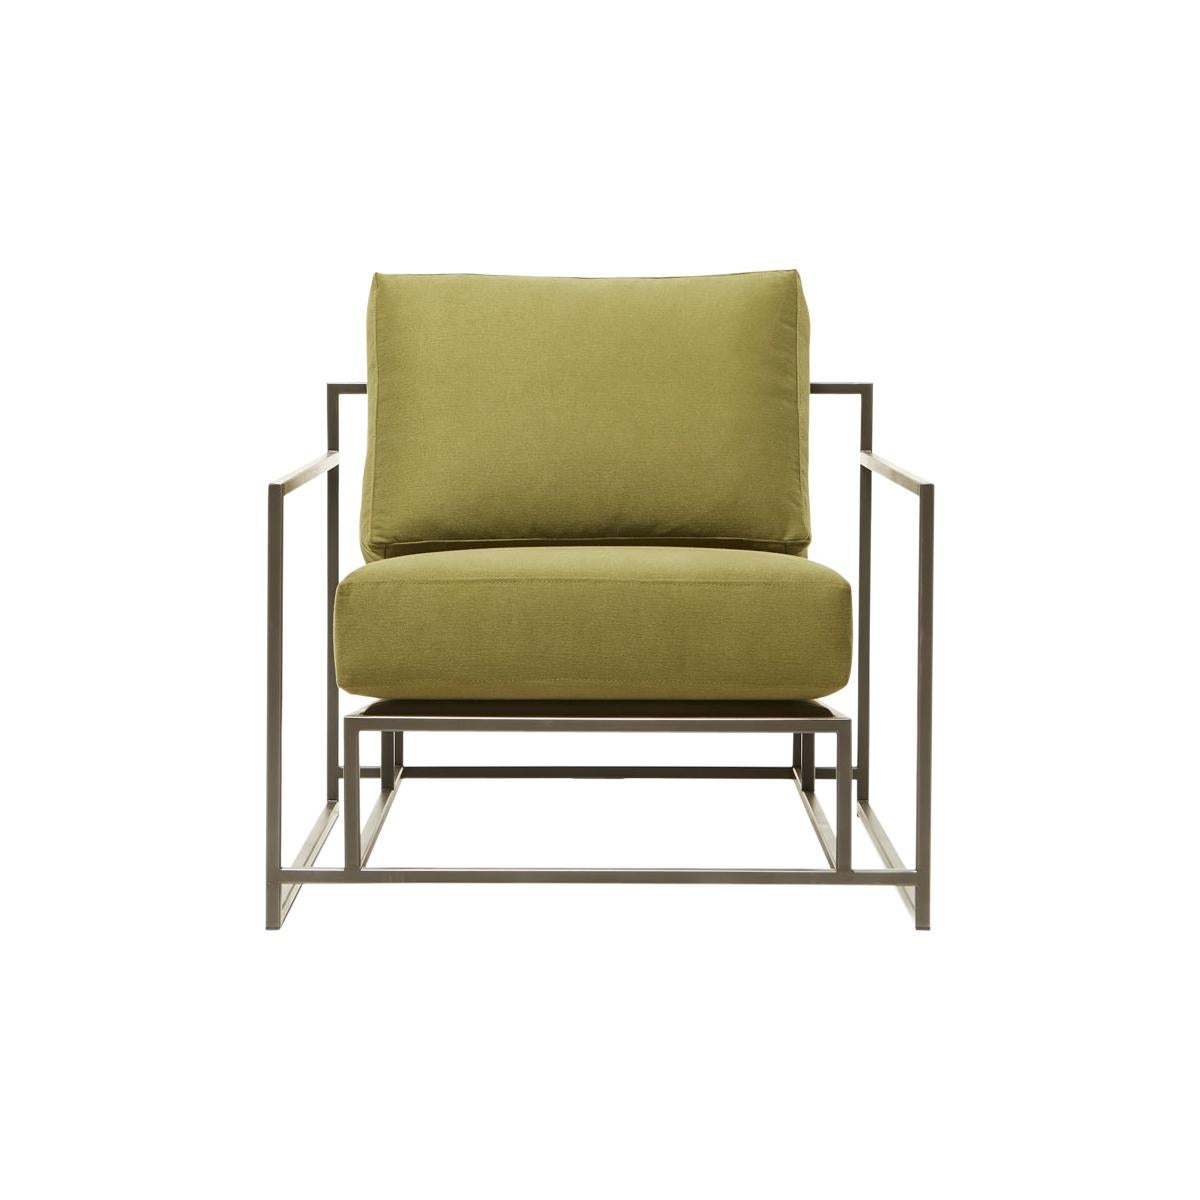 Olive Twill Canvas and Blackened Steel Armchair For Sale